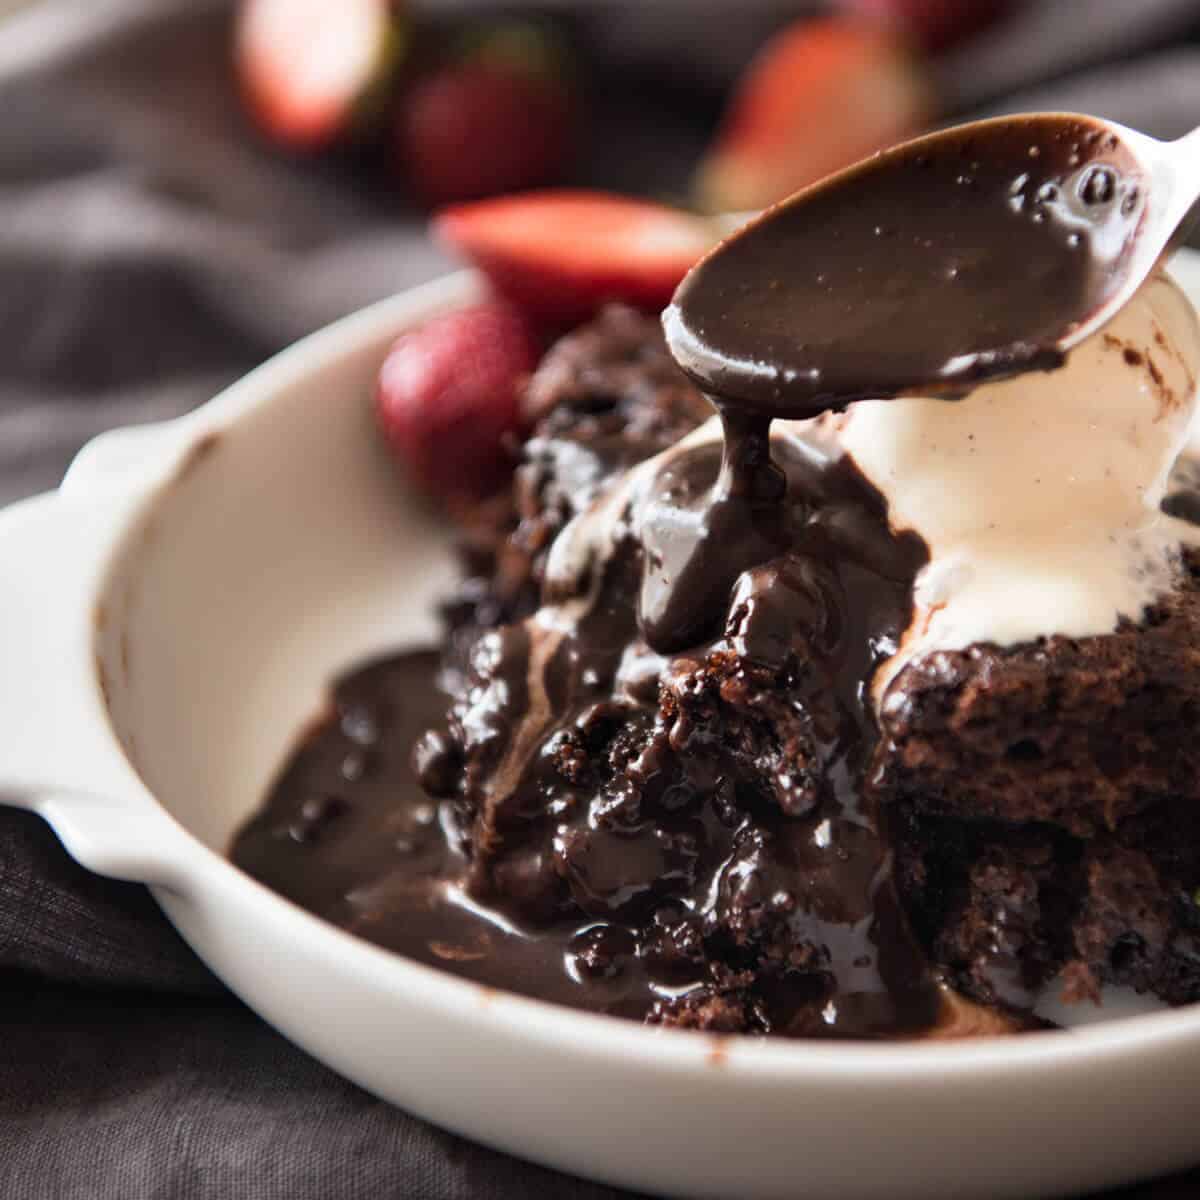 Chocolate Self Saucing Pudding - 1 batter transforms into a moist chocolate cake with a beautiful silky chocolate sauce! 10 minutes active effort. www.recipetineats.com